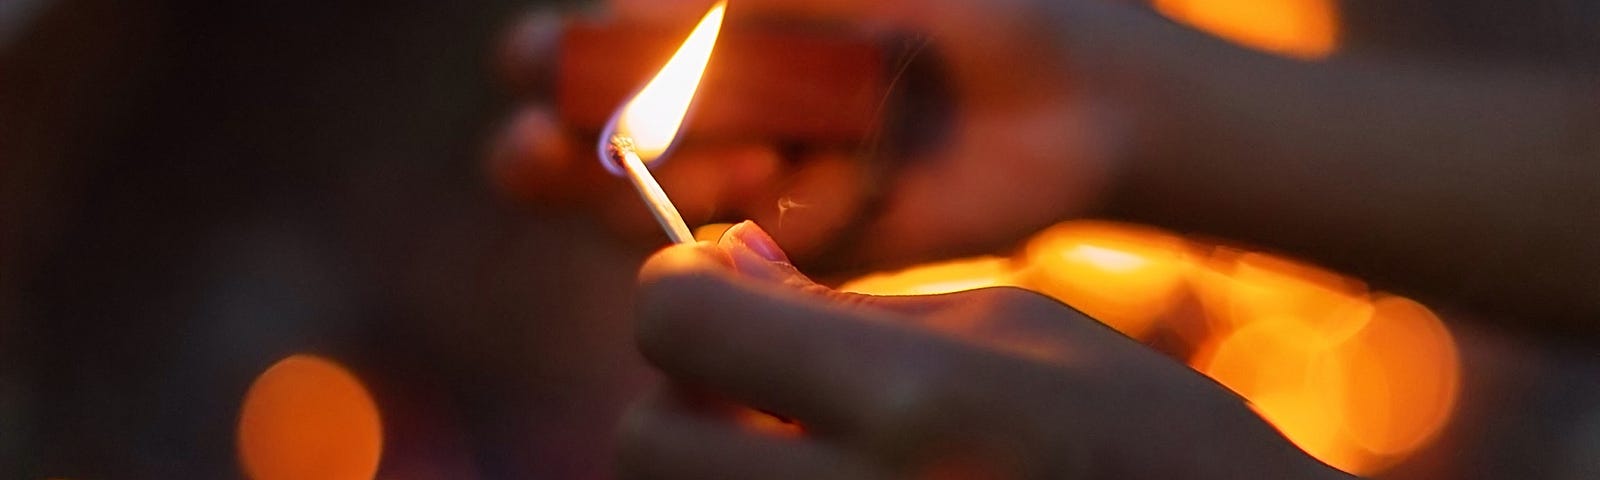 Person’s hands holding a lit match.